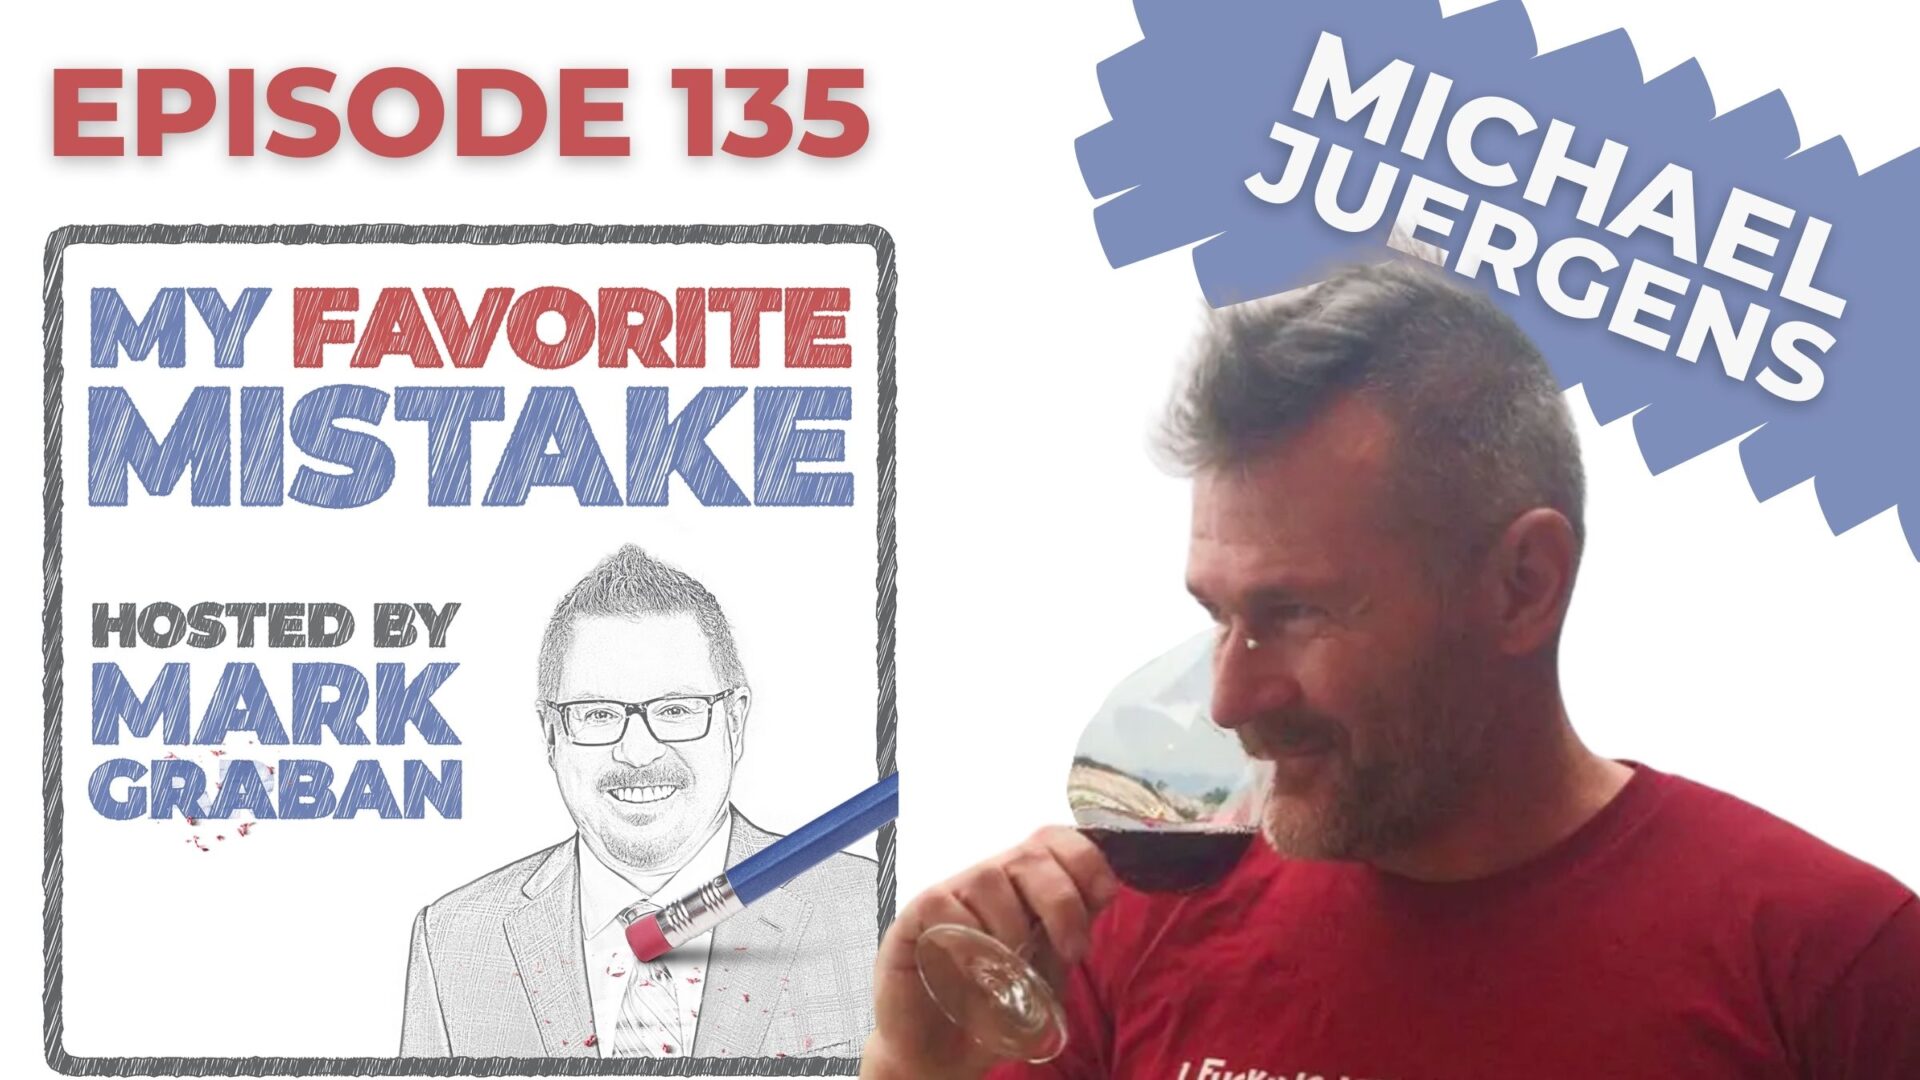 Sommelier and Consulting Firm Partner Michael Juergens on Wine Mistakes and More